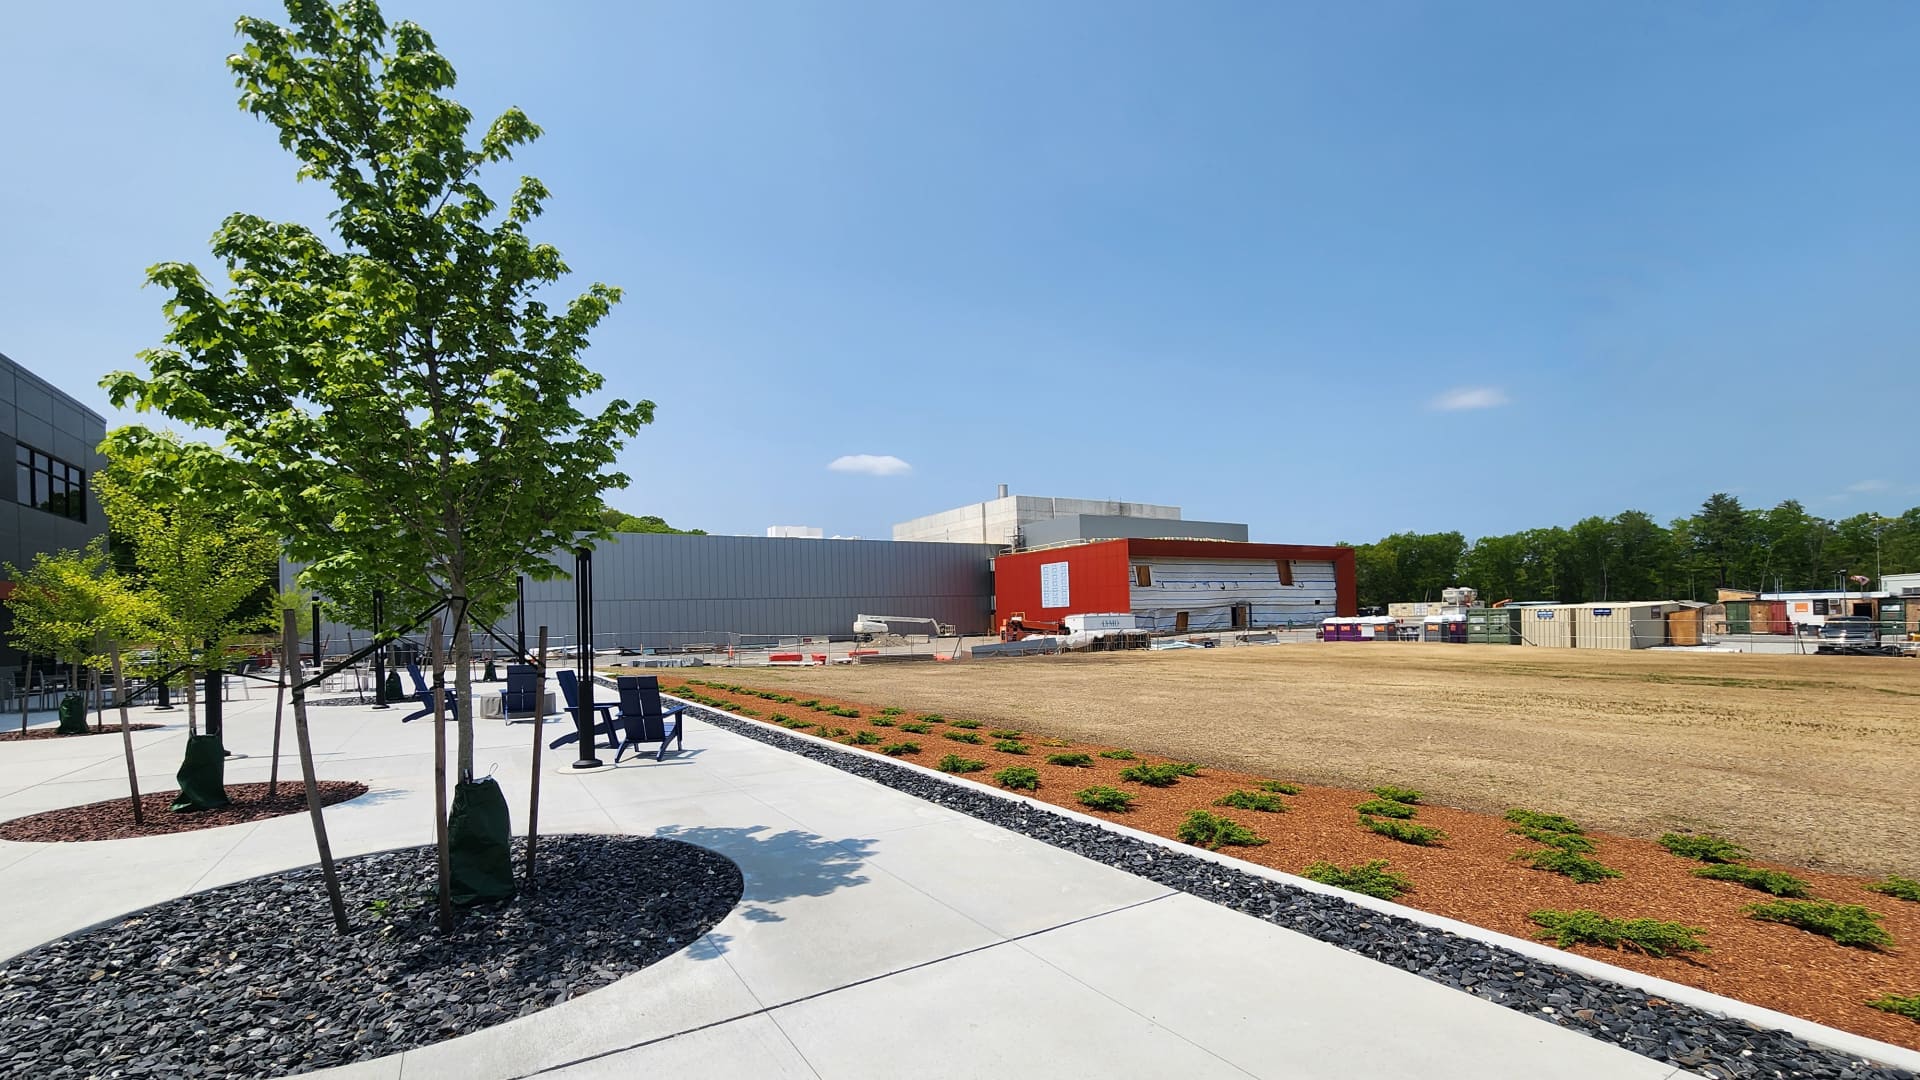 The SPARC facility under construction at the Commonwealth Fusion Systems campus in Devens, Massachusetts.